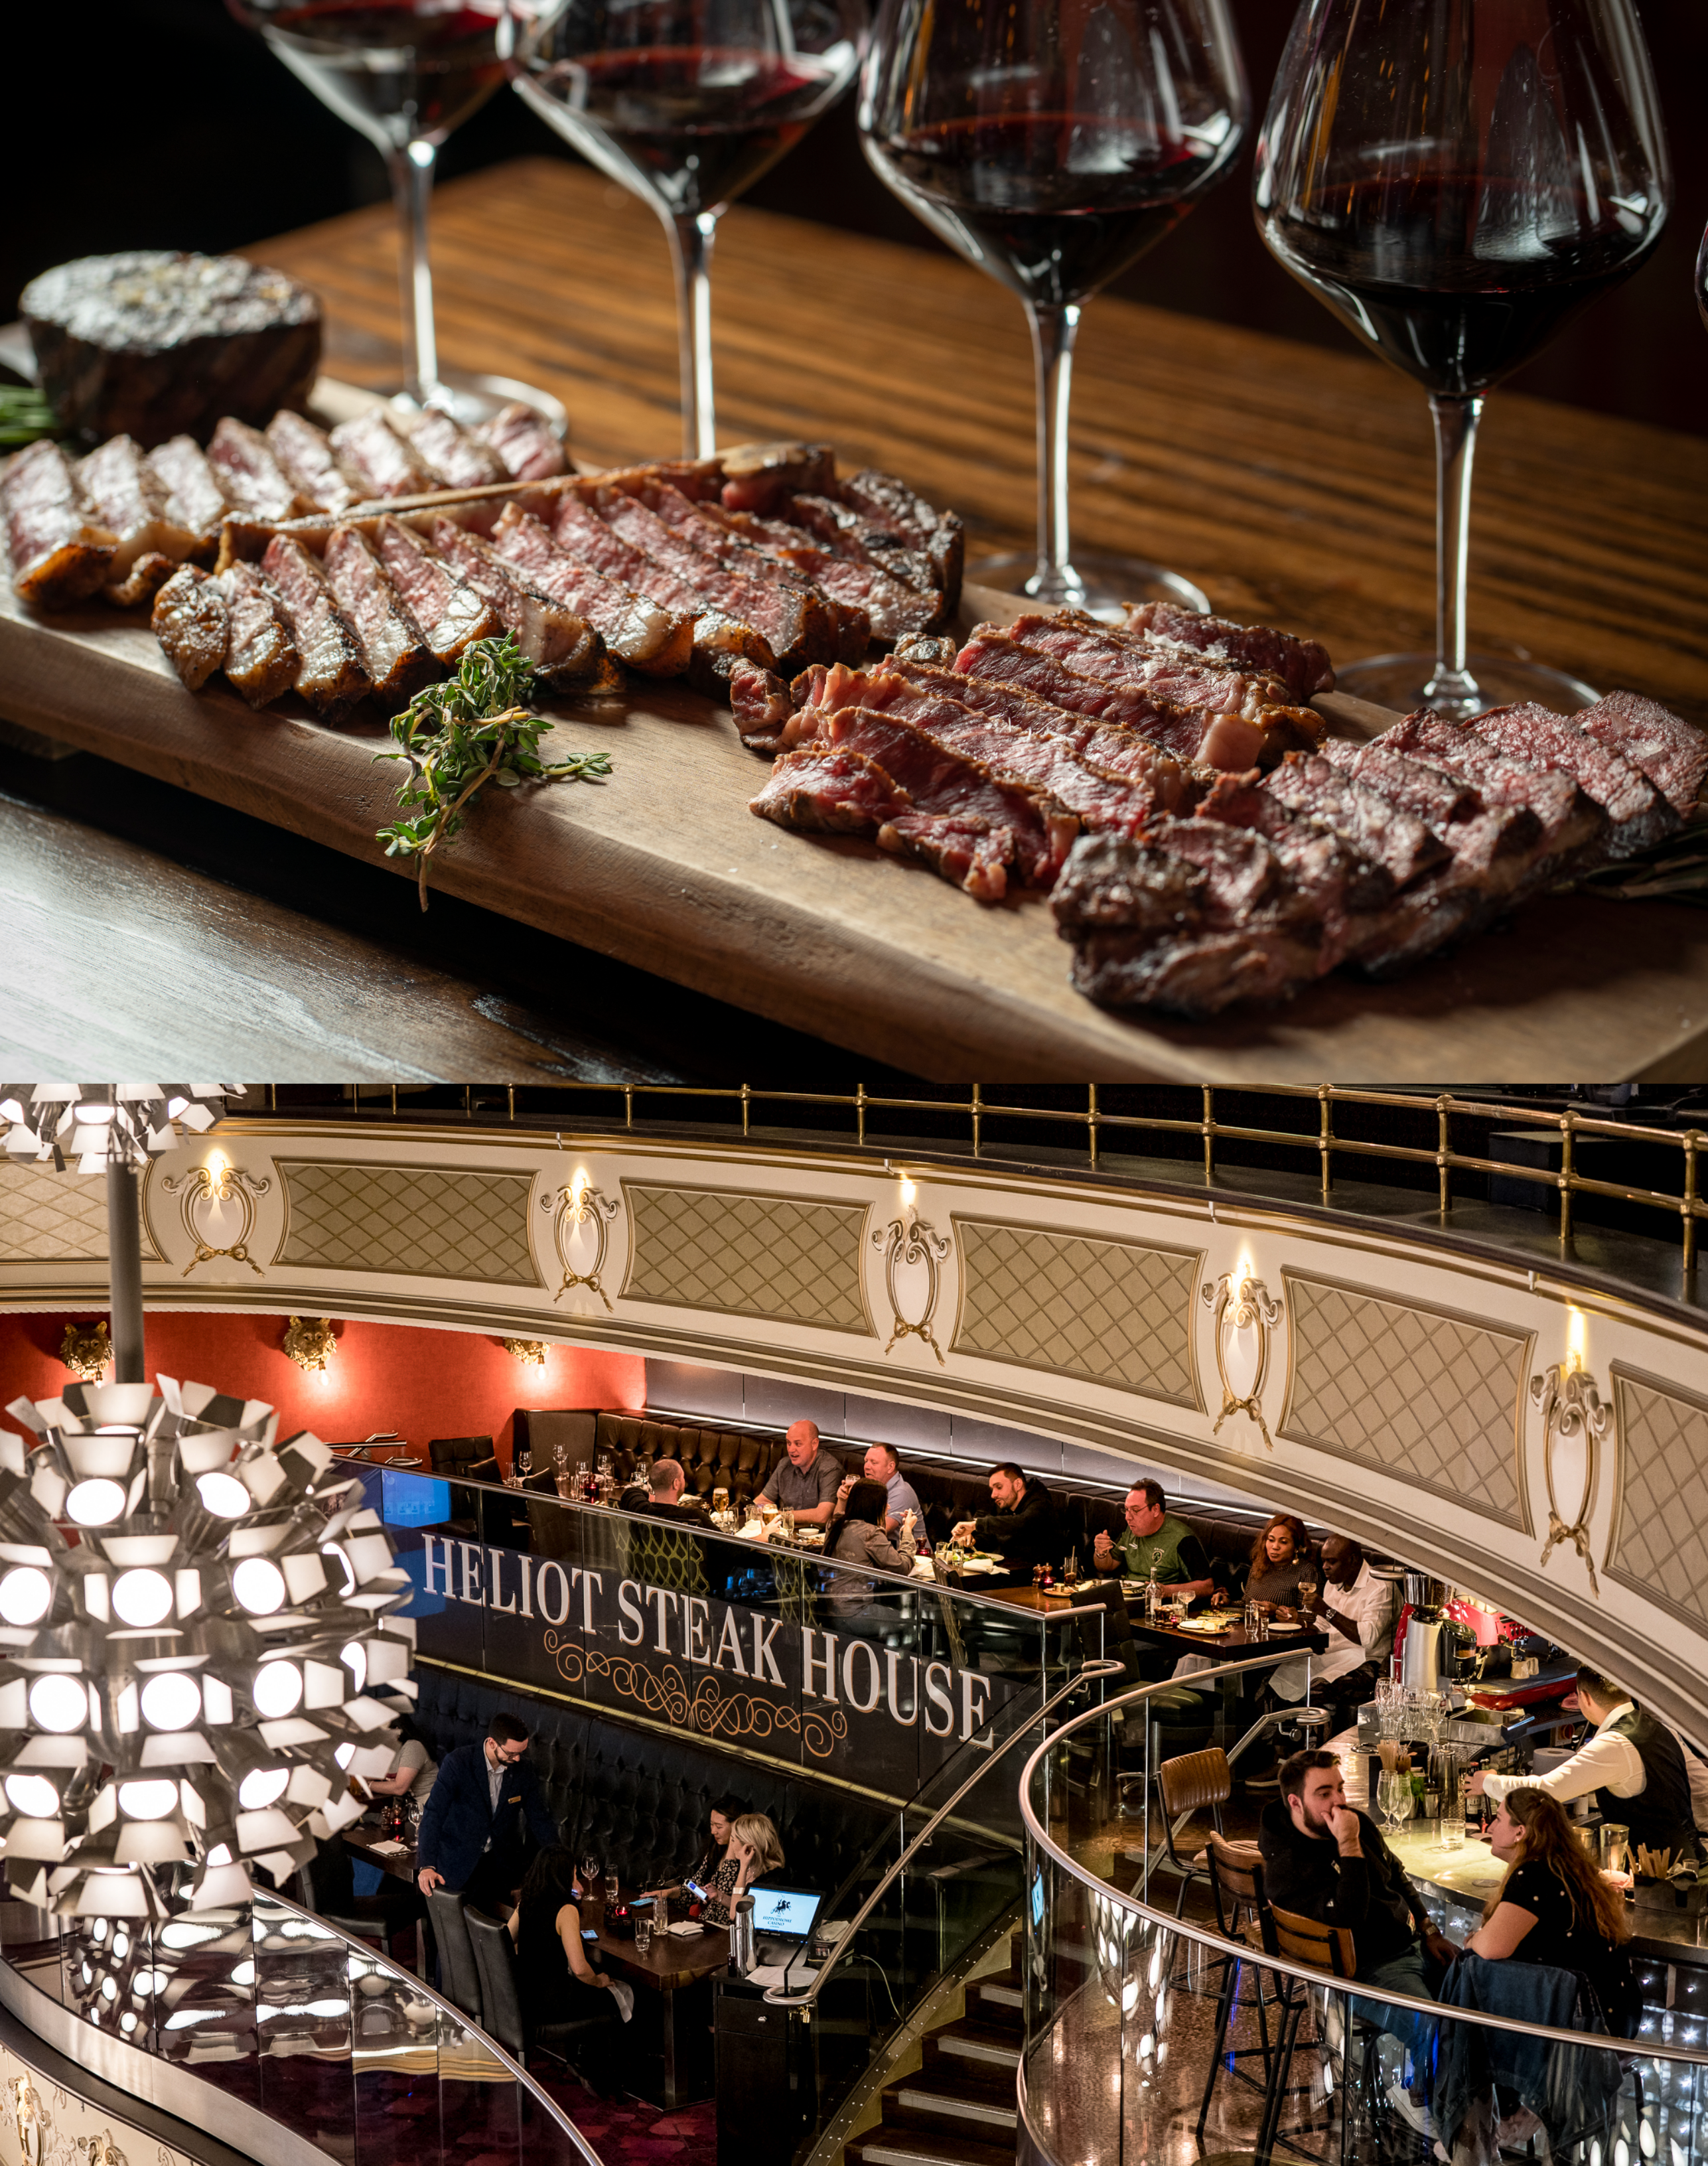 There’s nothing quite like a steak dinner in a casino and Heliot Steakhouse offers one of the best